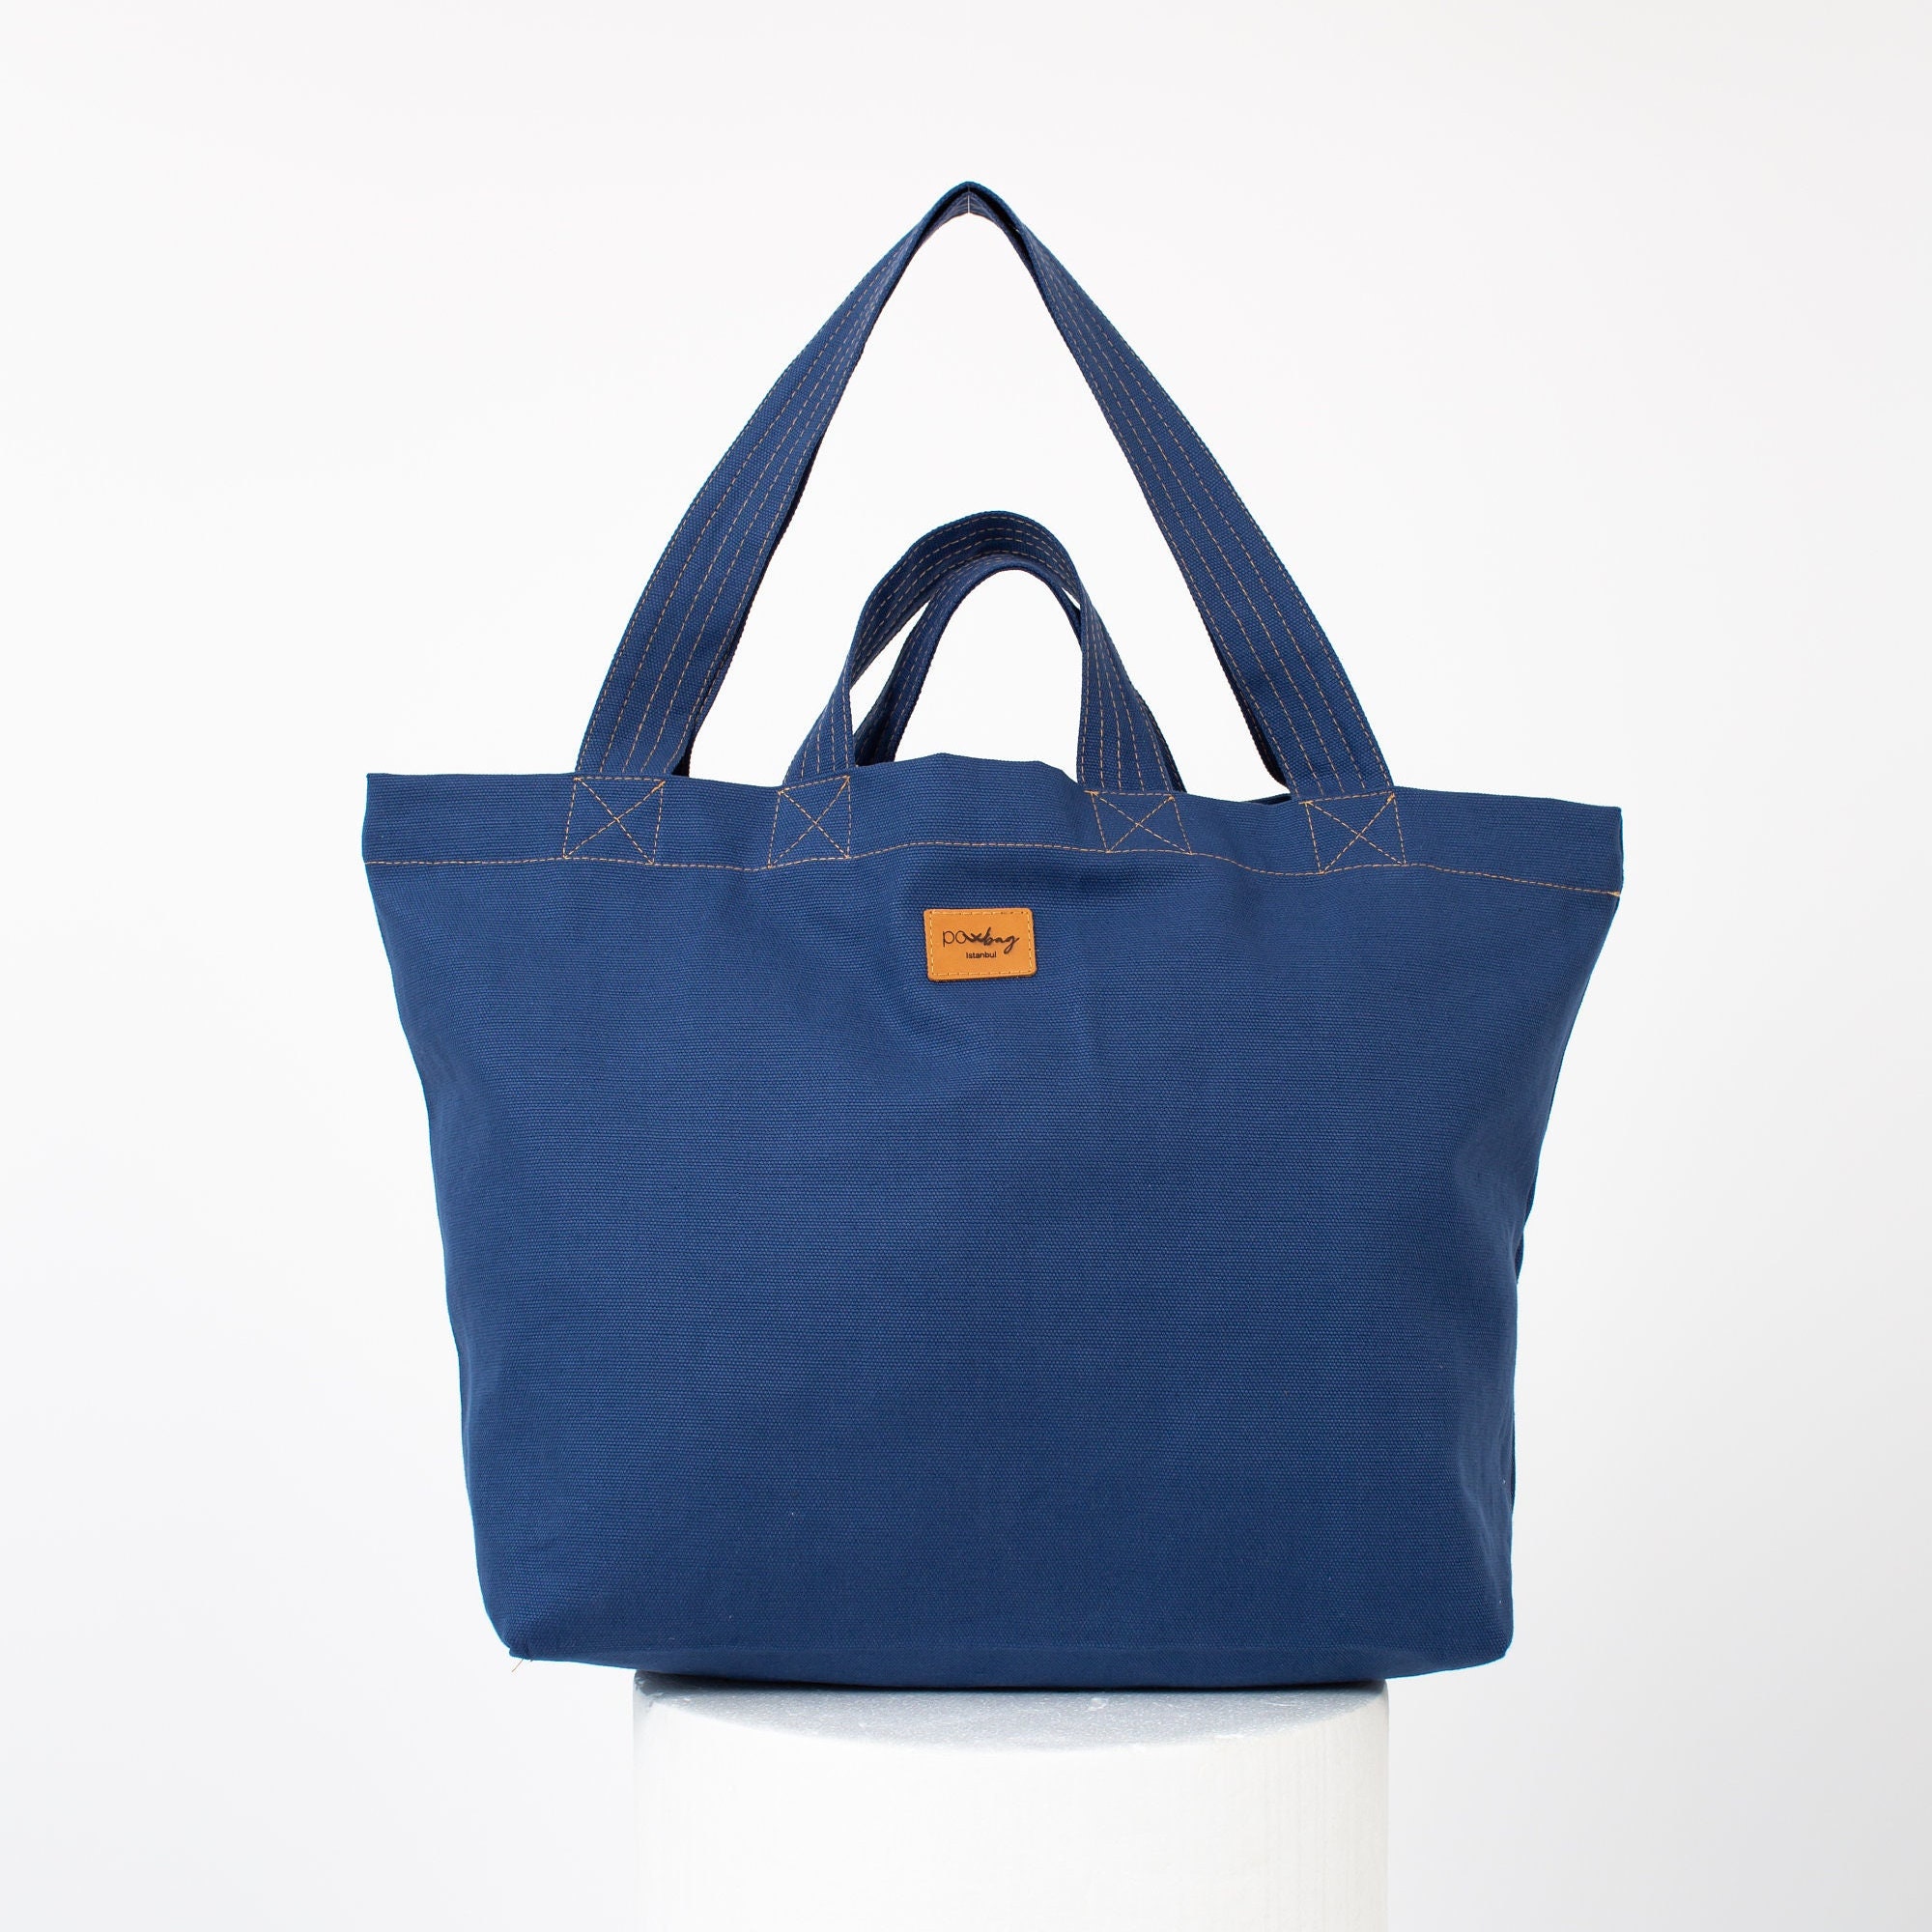 OVERSIZED Canvas Tote Bag With Hand & Shoulder Straps, Blue Minimalist ...